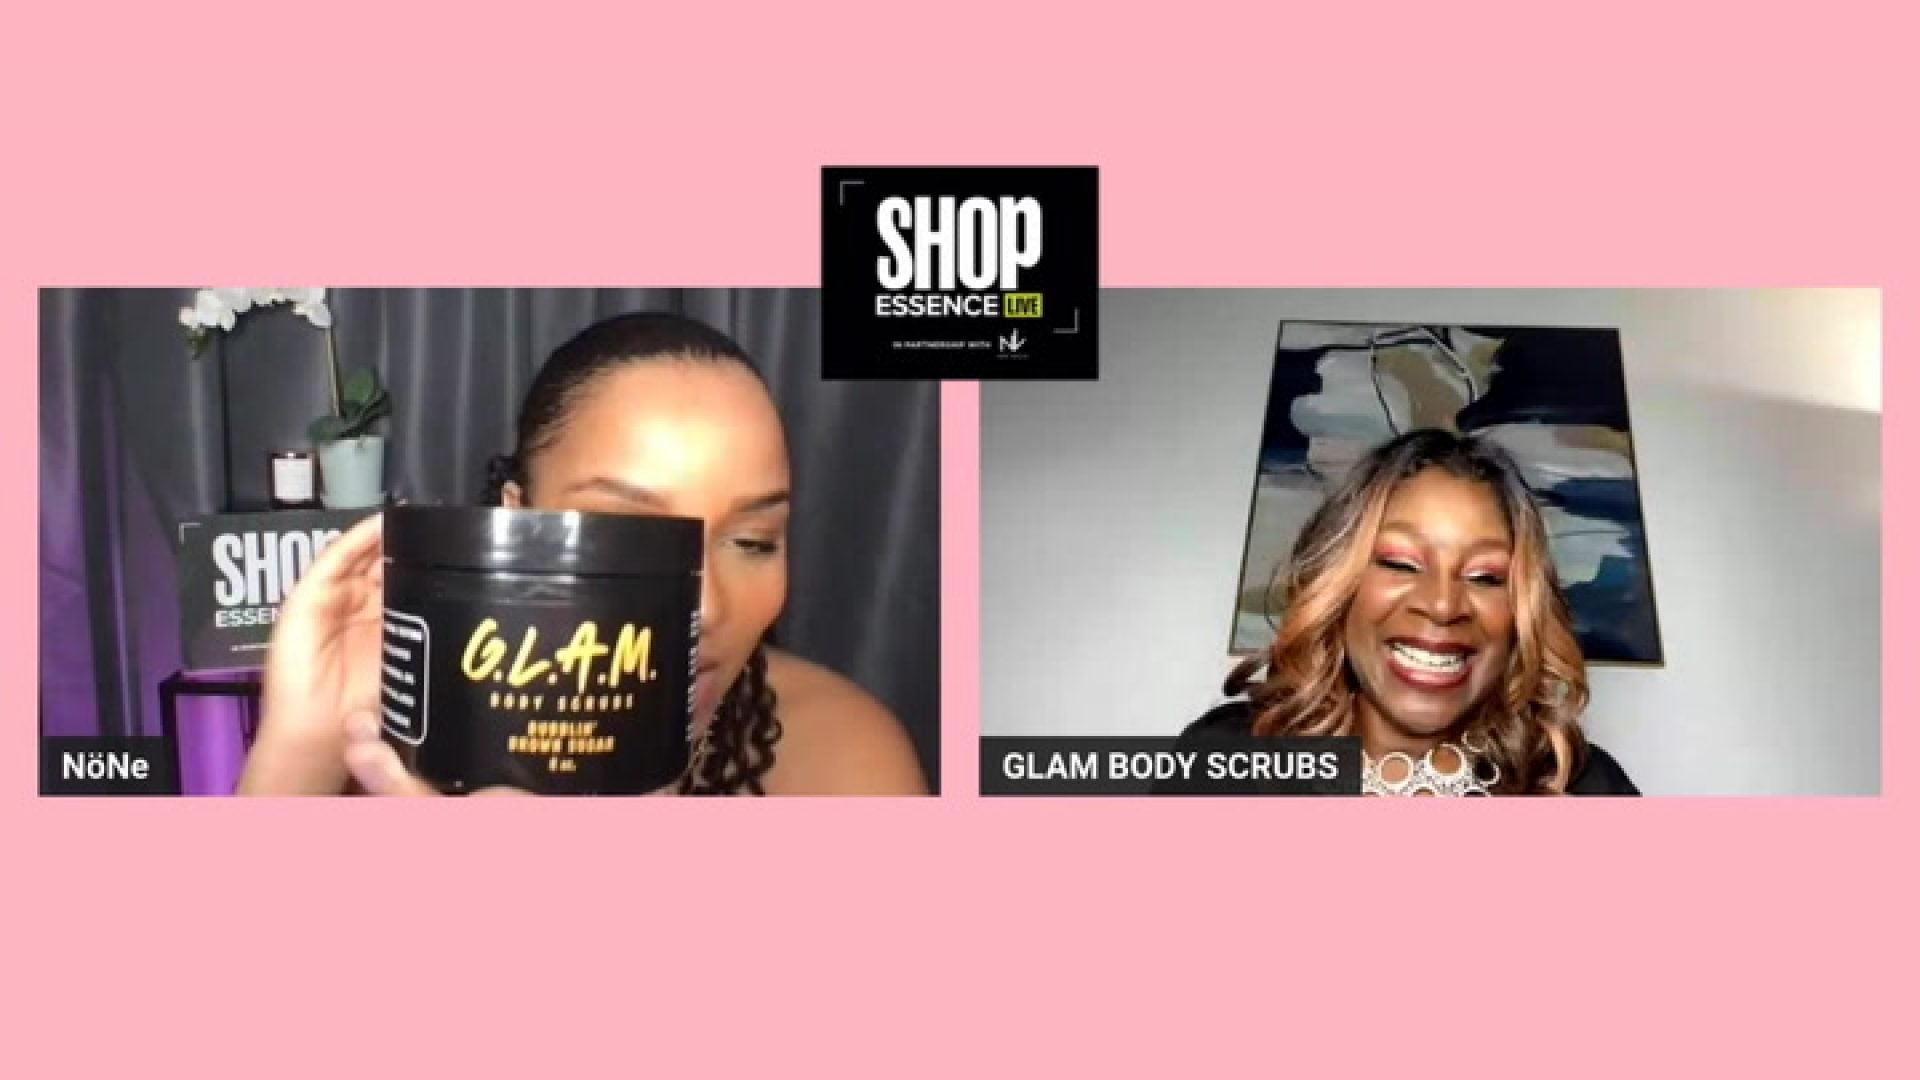 WATCH: Shop Essence Live – Get Smooth and Lustrous Skin With G.L.A.M Body Scrubs